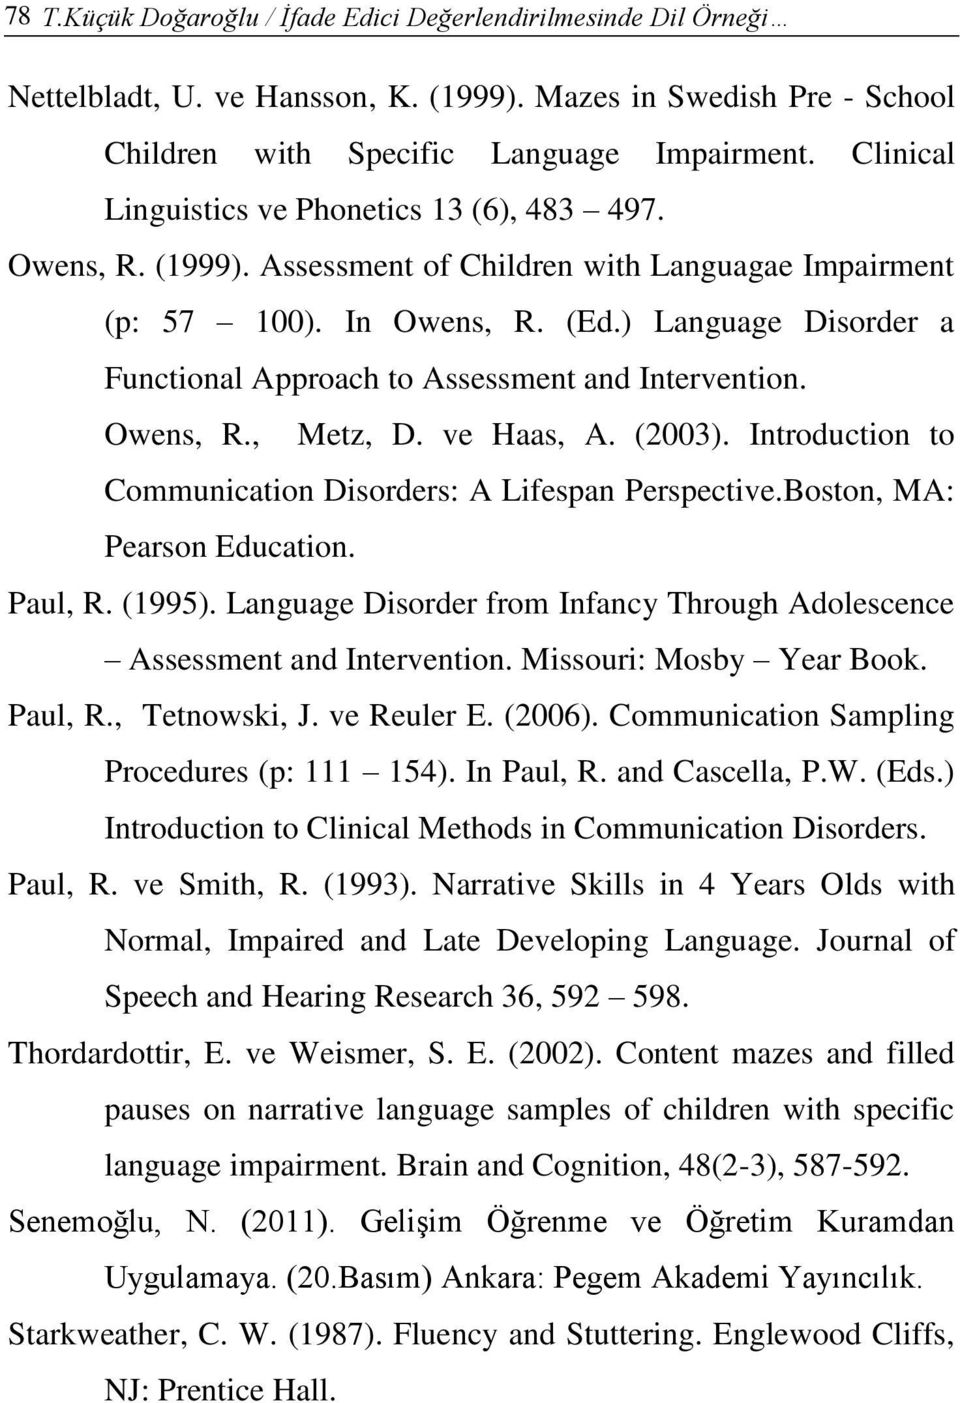 ) Language Disorder a Functional Approach to Assessment and Intervention. Owens, R., Metz, D. ve Haas, A. (2003). Introduction to Communication Disorders: A Lifespan Perspective.